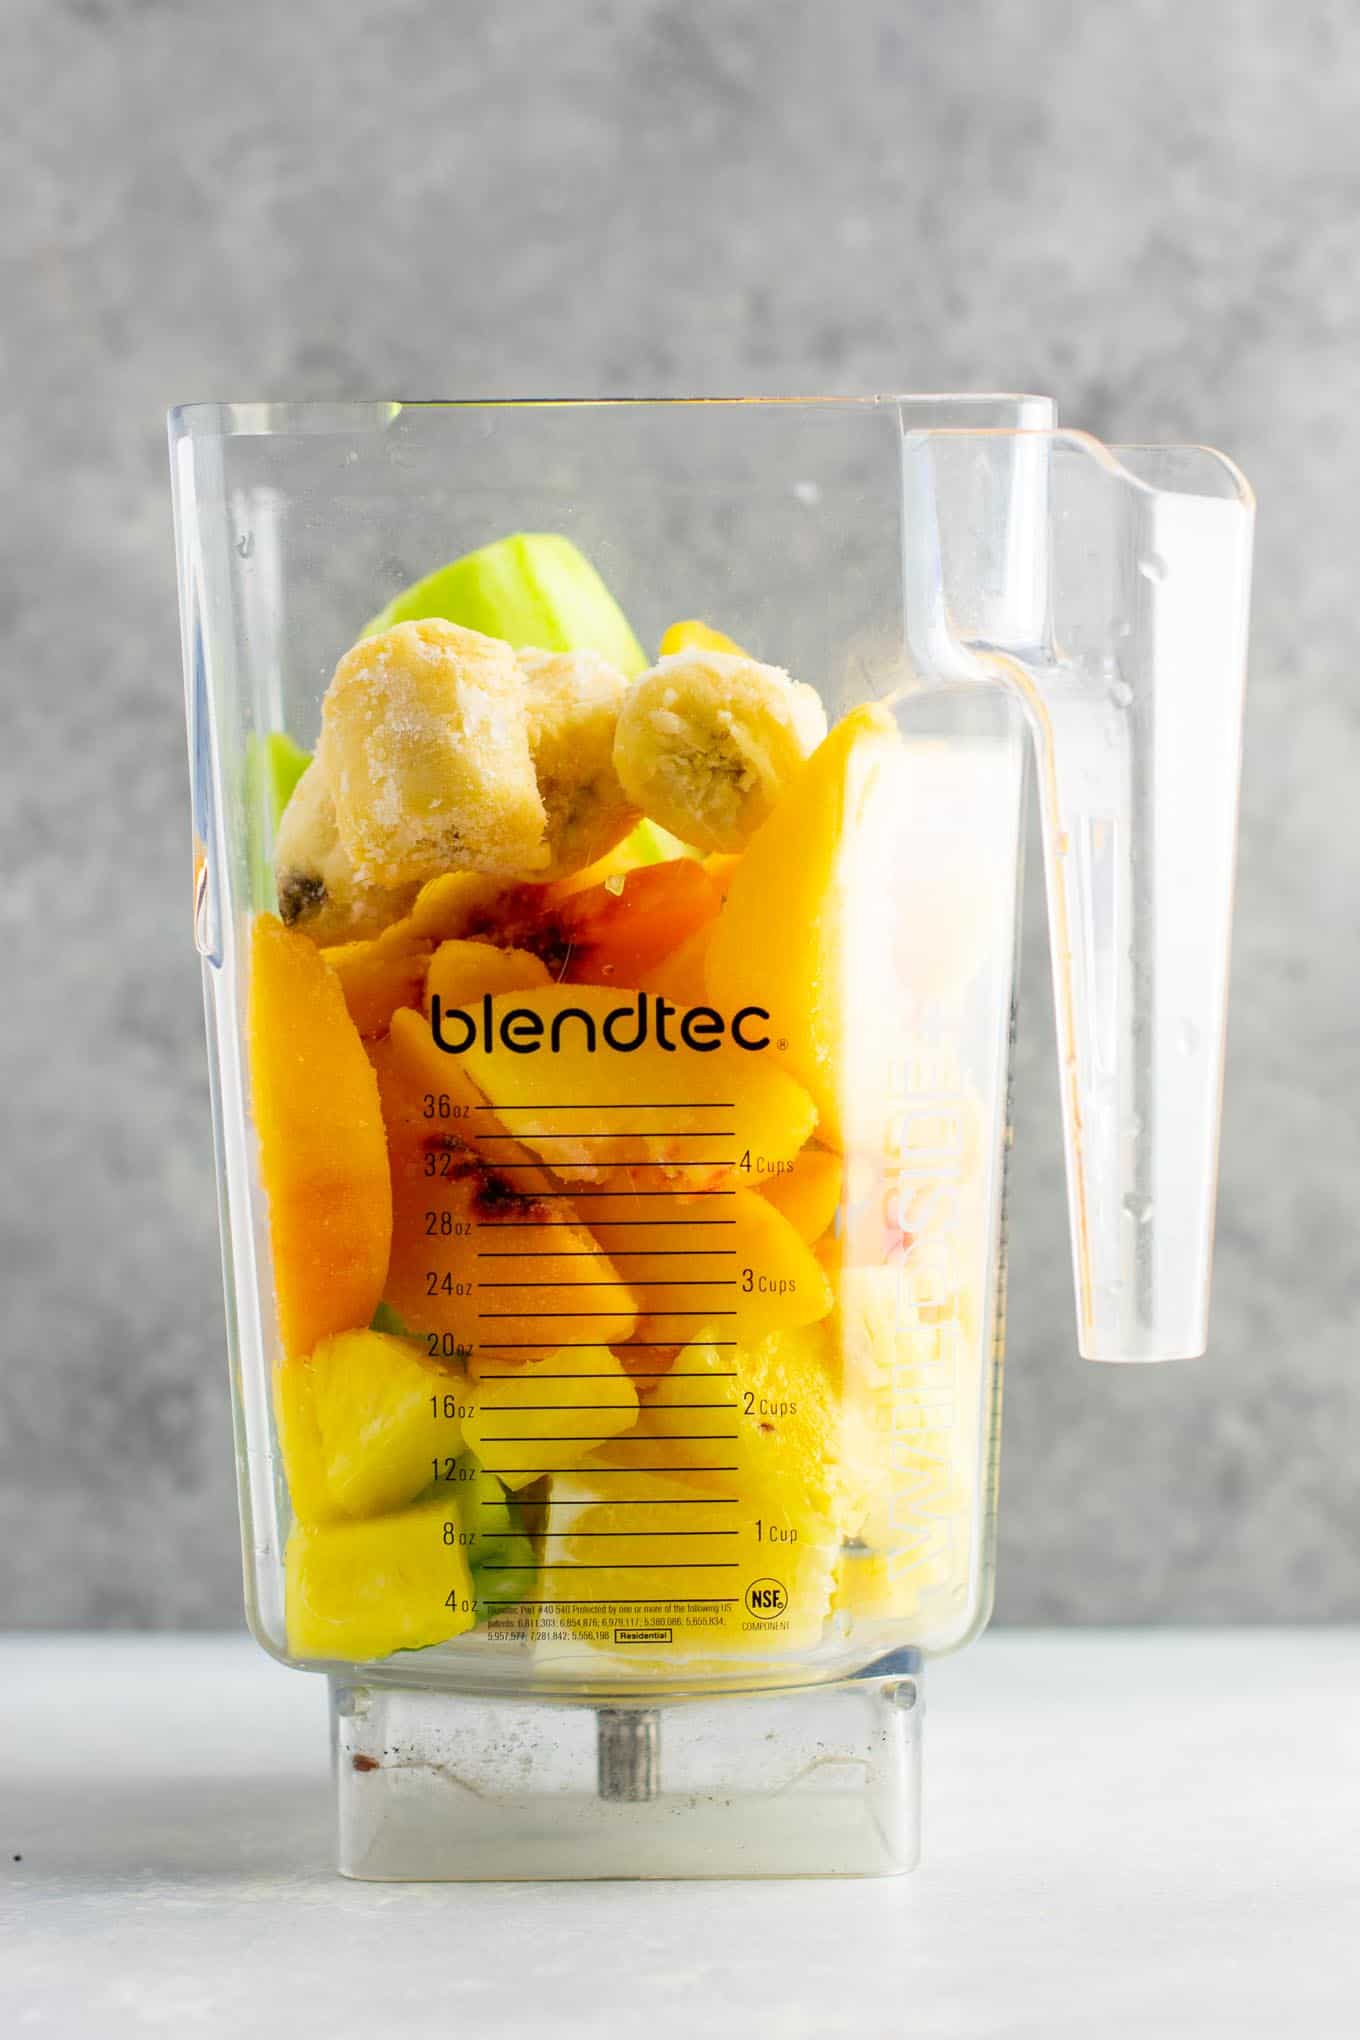 Pineapple detox smoothie with cucumbers, celery, lemon, peaches, ginger, and frozen bananas. A healthy smoothie recipe that tastes delicious! #detox #detoxsmoothie #healthysmoothie #vegan #healthyeating #healthyrecipe #smoothie #vegansmoothie